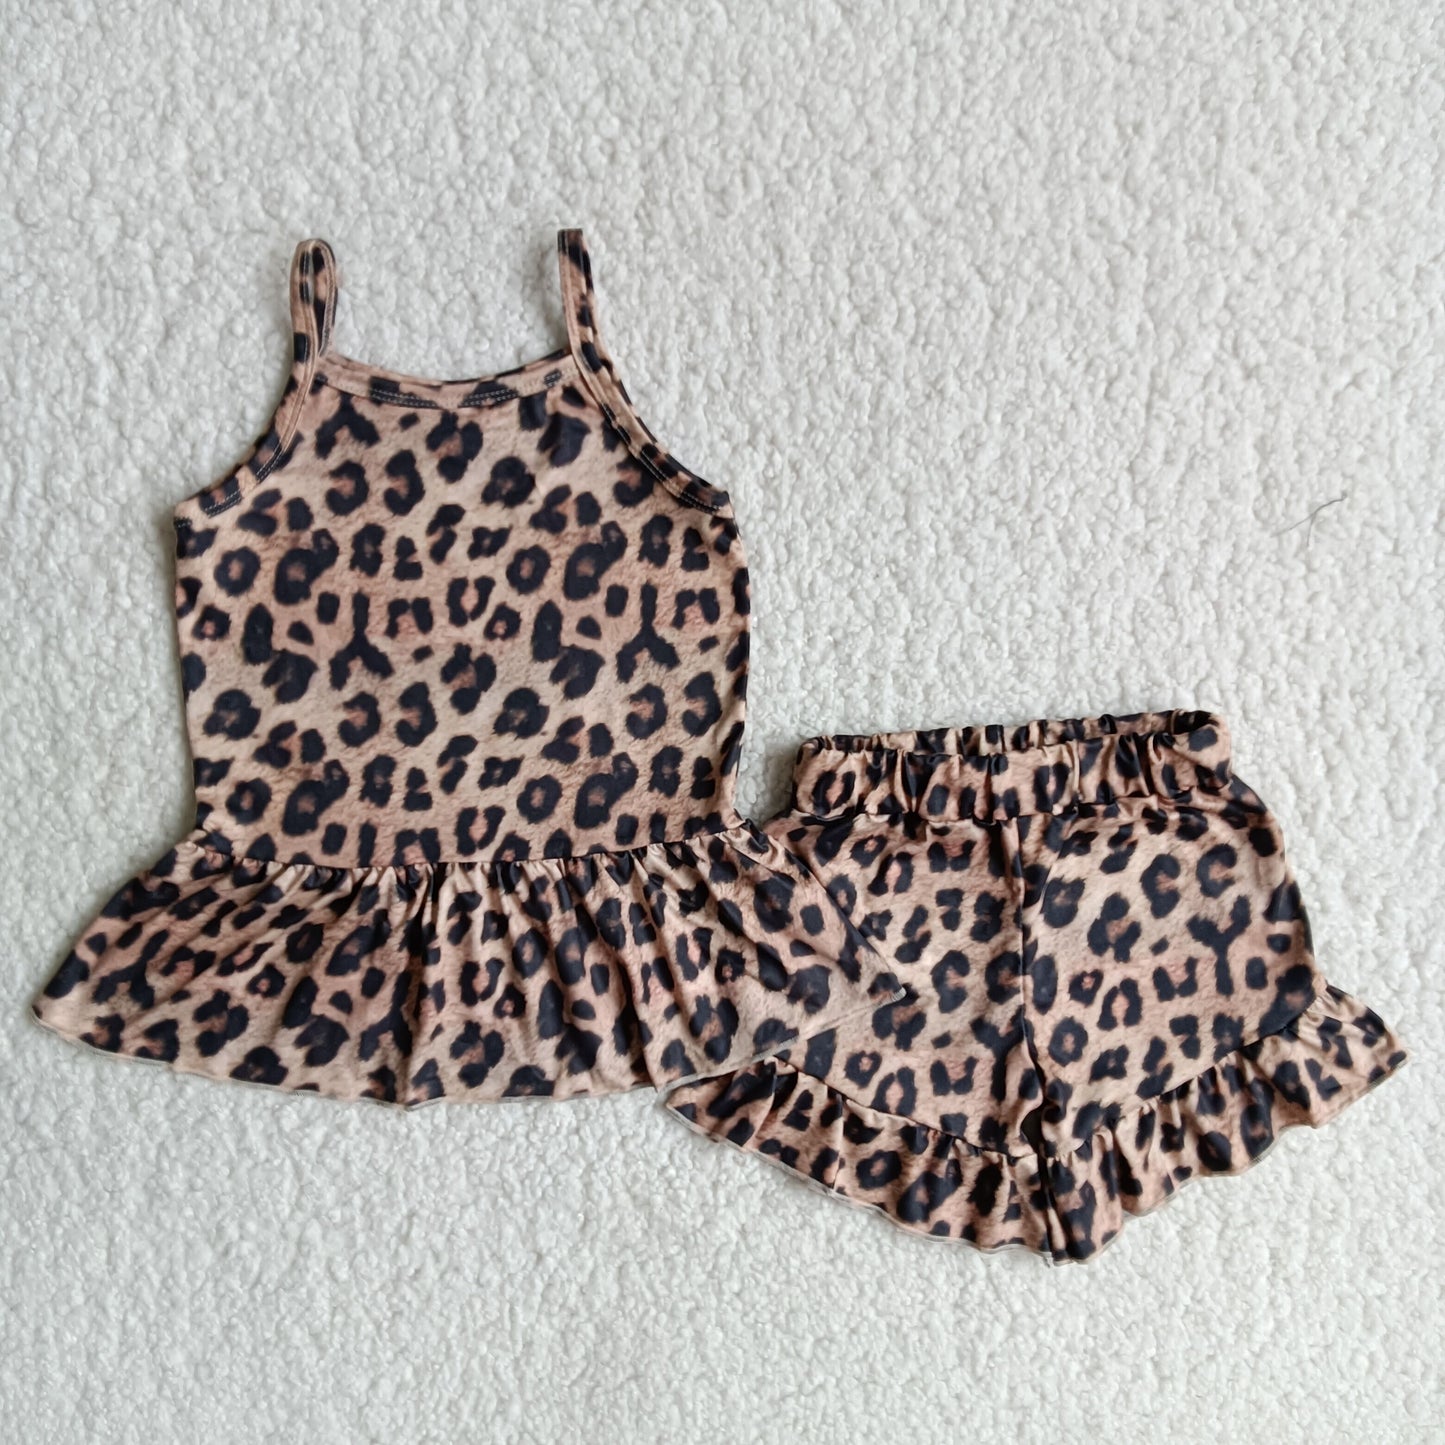 Girls leopard outfit